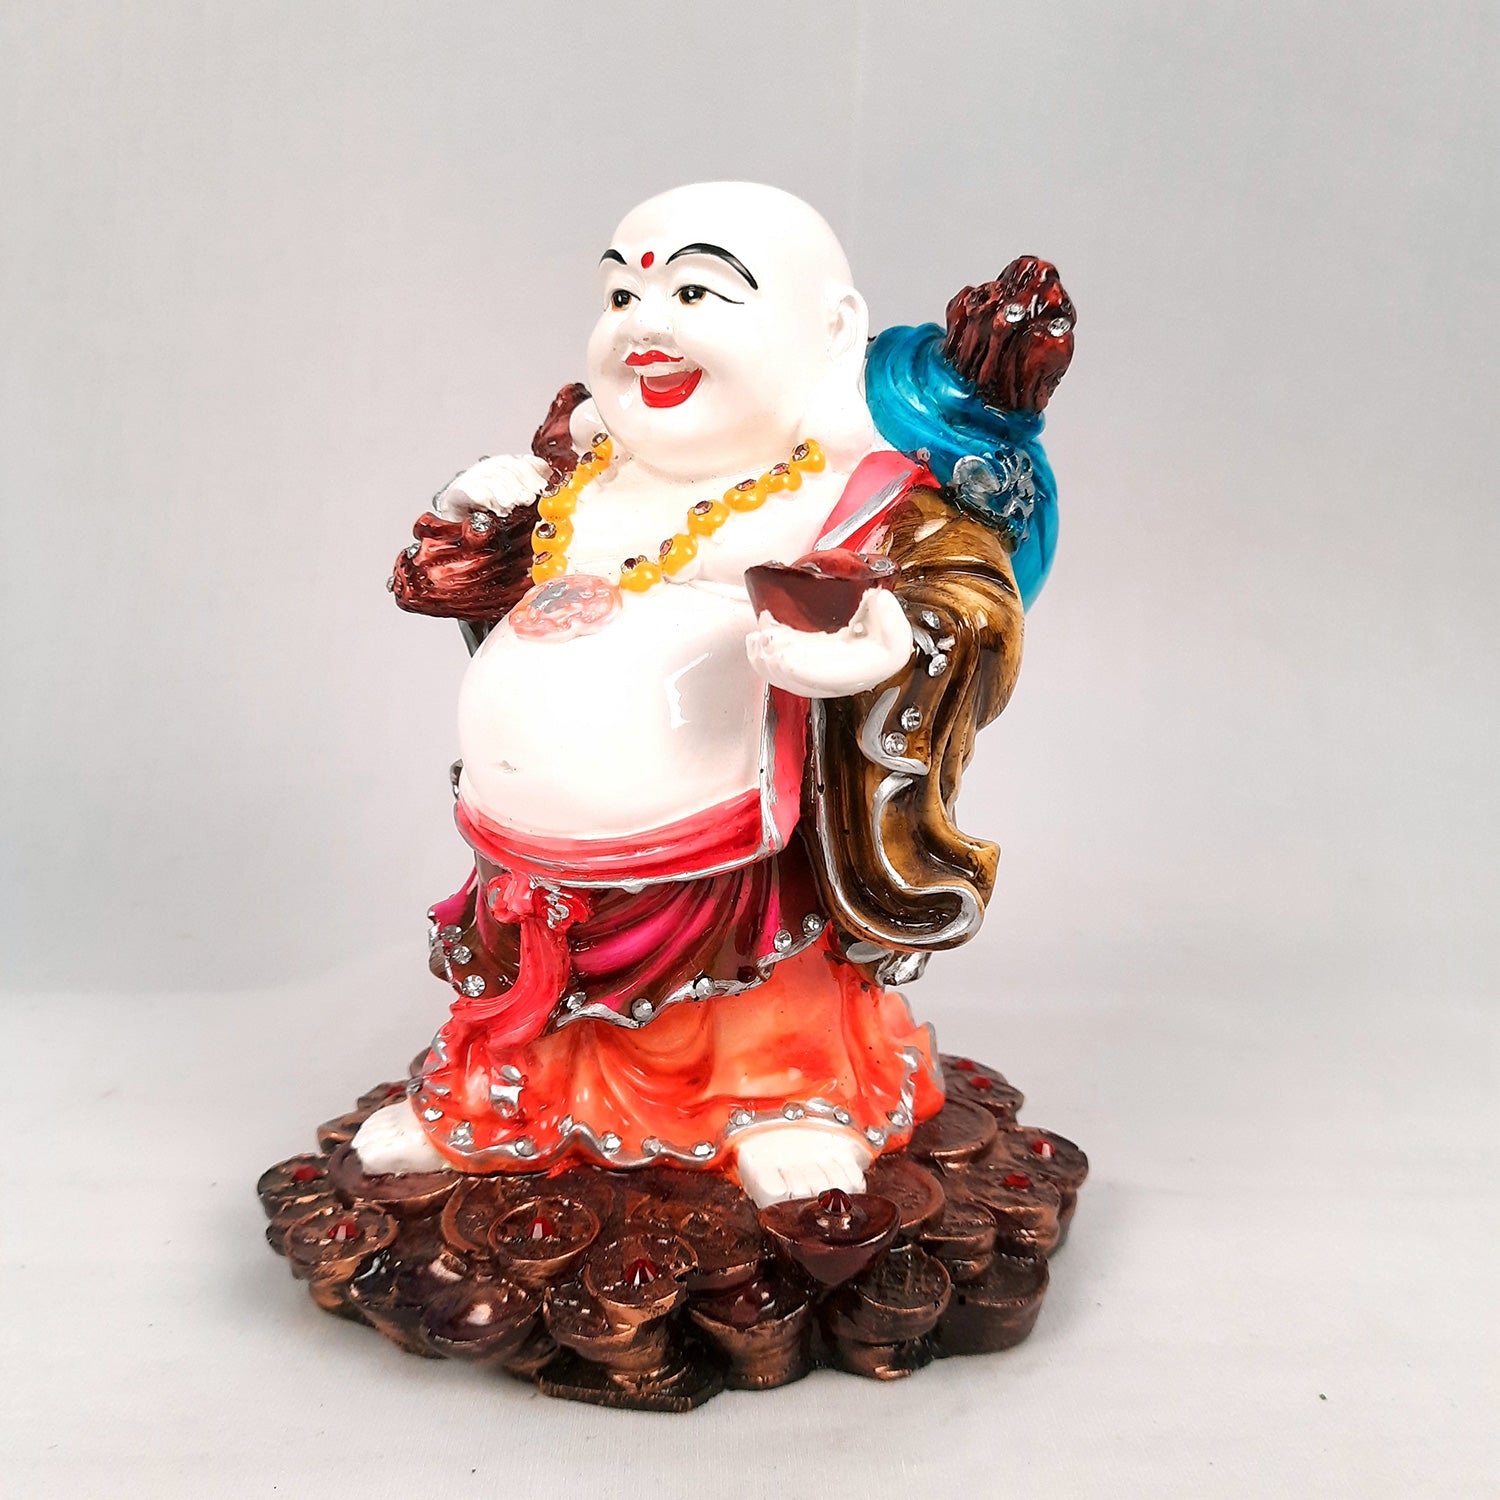 Laughing Buddha Showpiece With Money Bag - Standing On Coins Designs | Happy Man Fen Shui Statue For Money, Wealth & Prosperity - For Vastu, Home, Table & Office Decor & Gift - 9 Inch - Apkamart